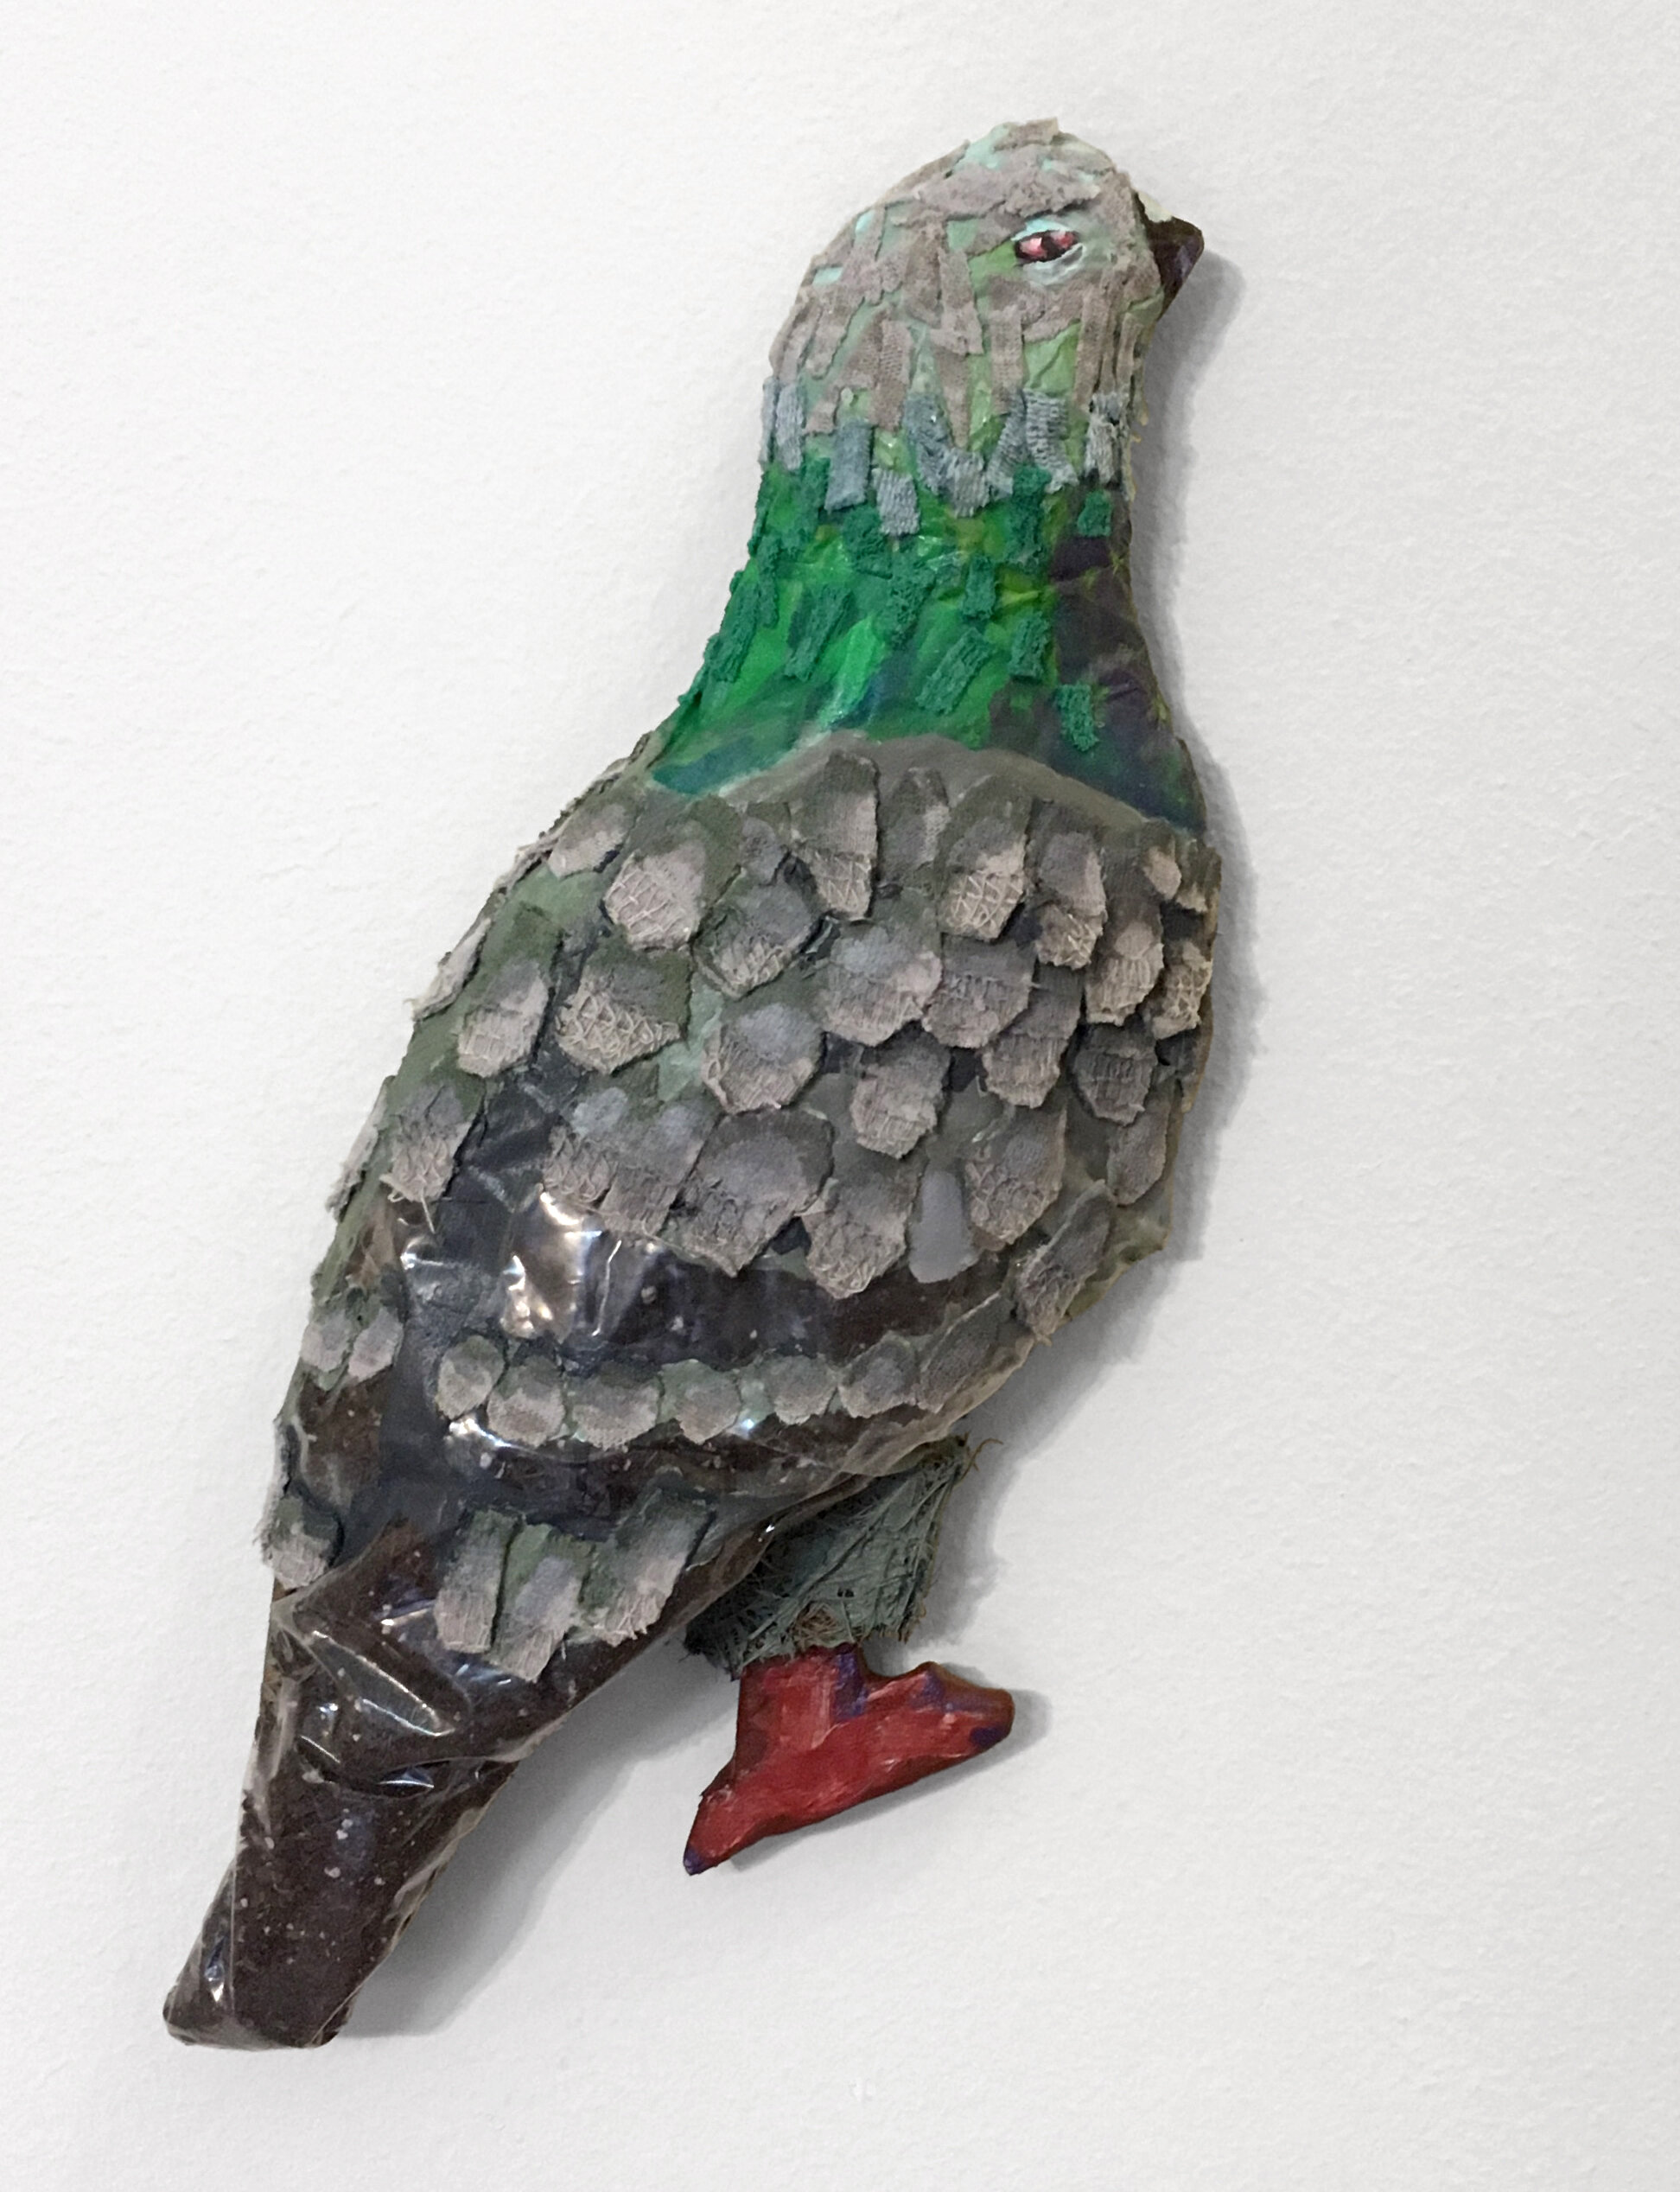  “Guardian Pigeon”, 9h x 4w x 1d in, Acrylic on fabric, cardboard, coconut husk, and plastic bags stuffed with soil, 2019 